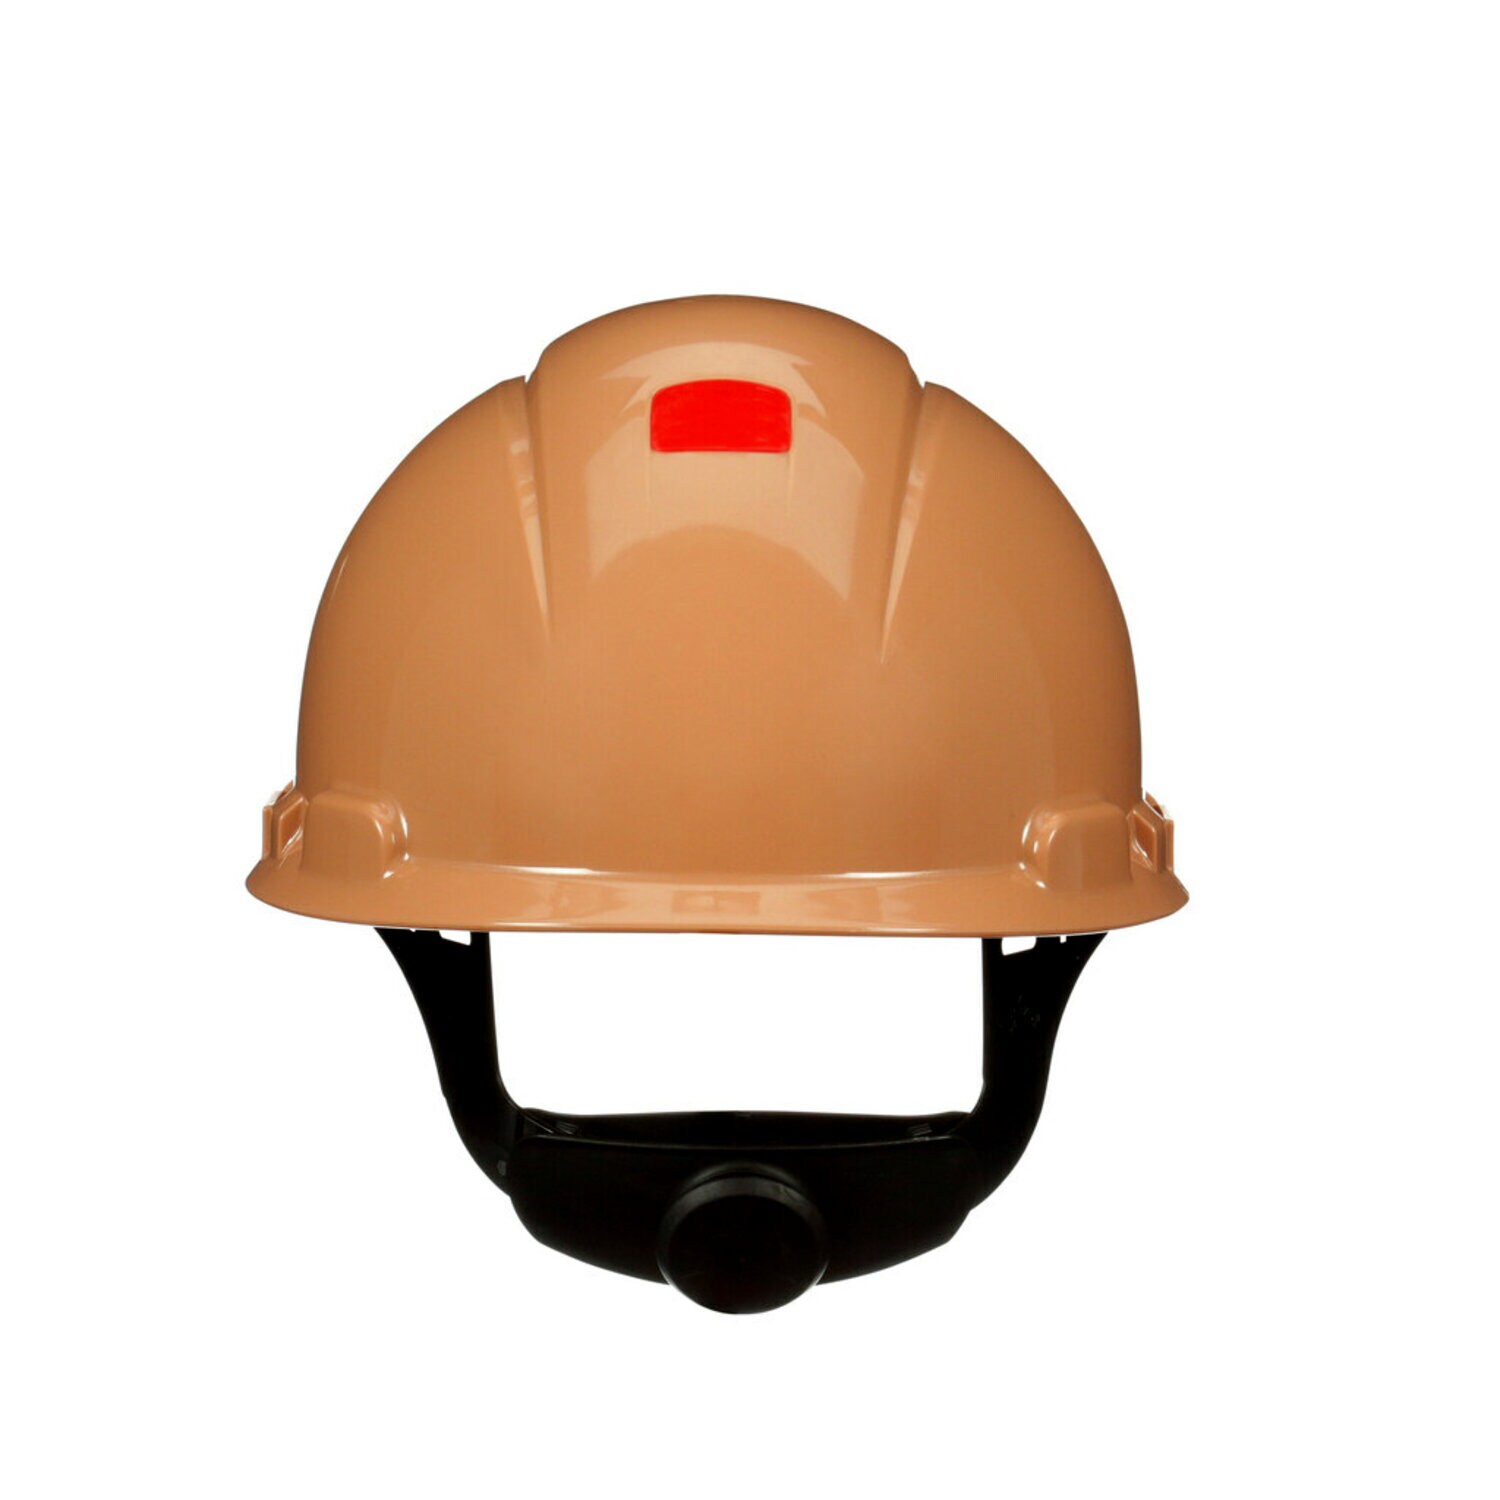 7100240006 - 3M SecureFit Hard Hat H-711SFR-UV, Tan, 4-Point Pressure Diffusion Ratchet Suspension, with Uvicator, 20 ea/Case